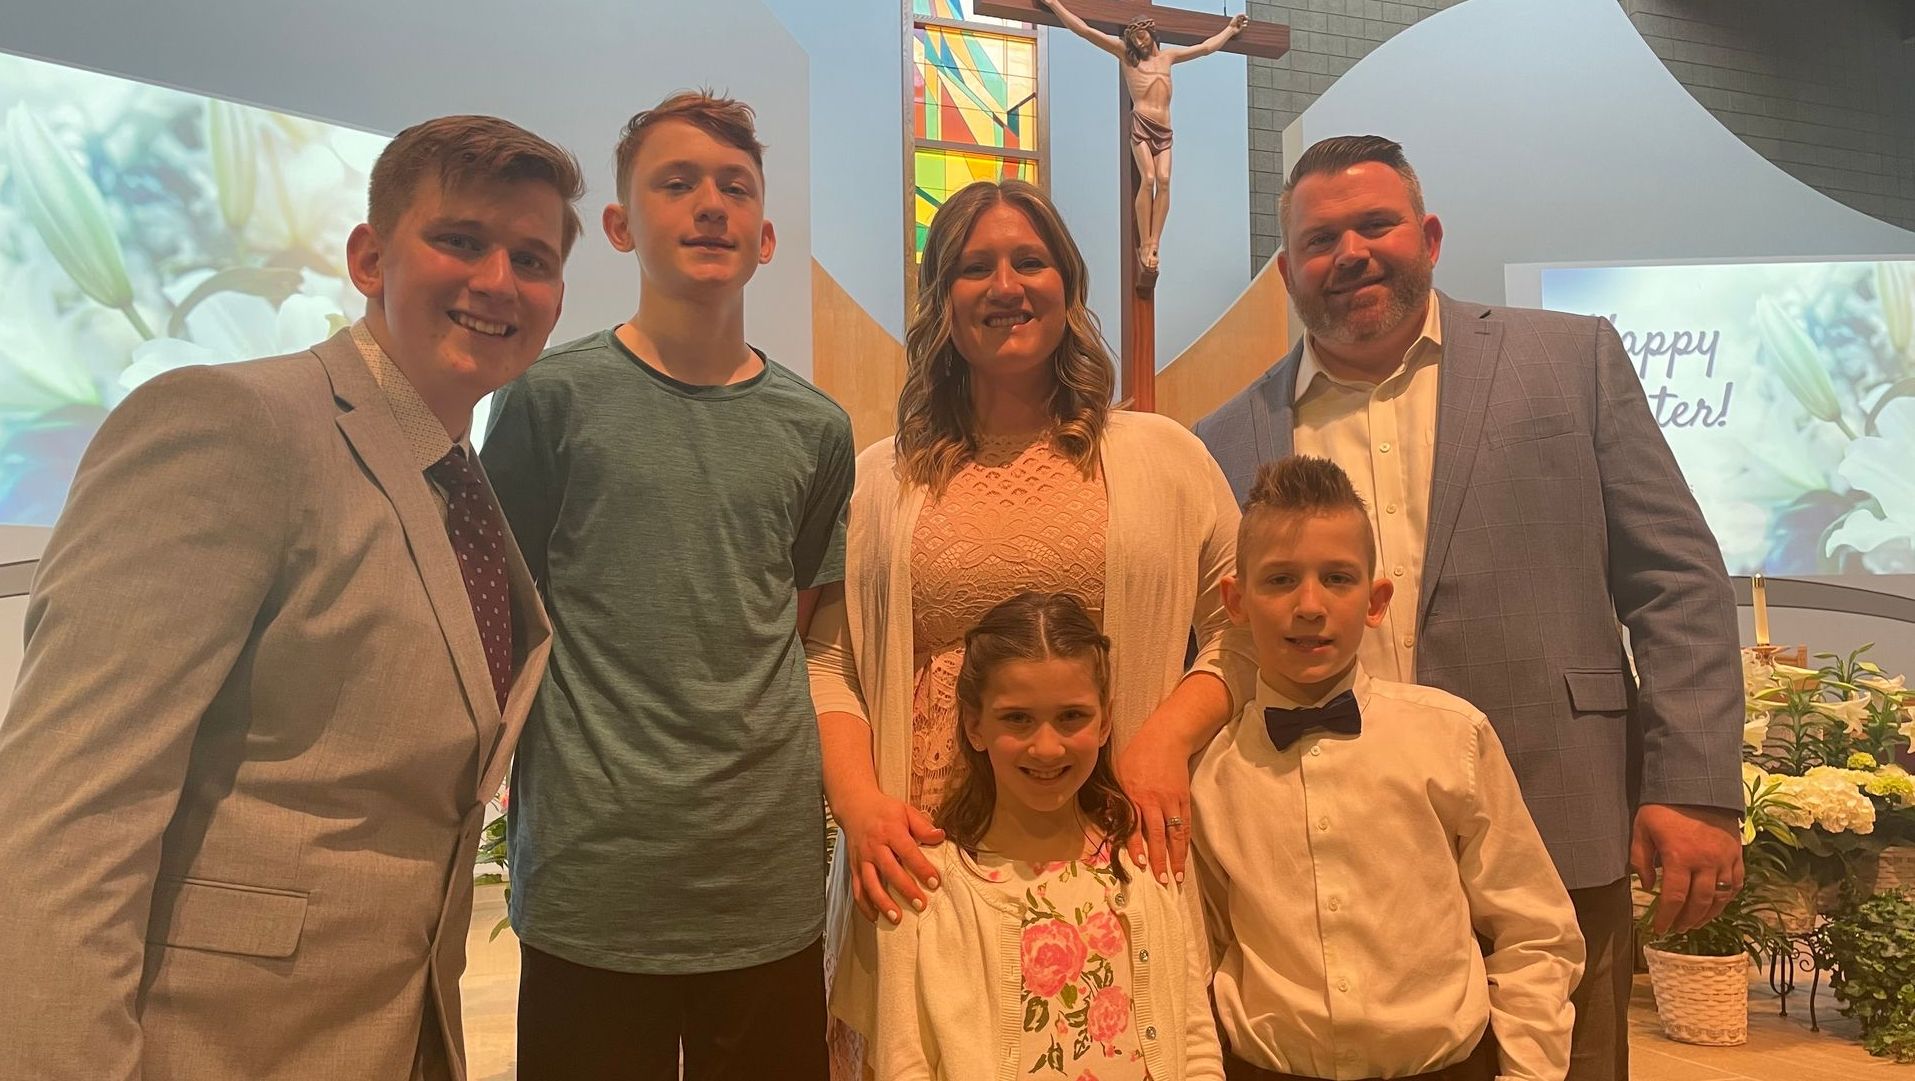 Image of Joe Pometto and his family at church.